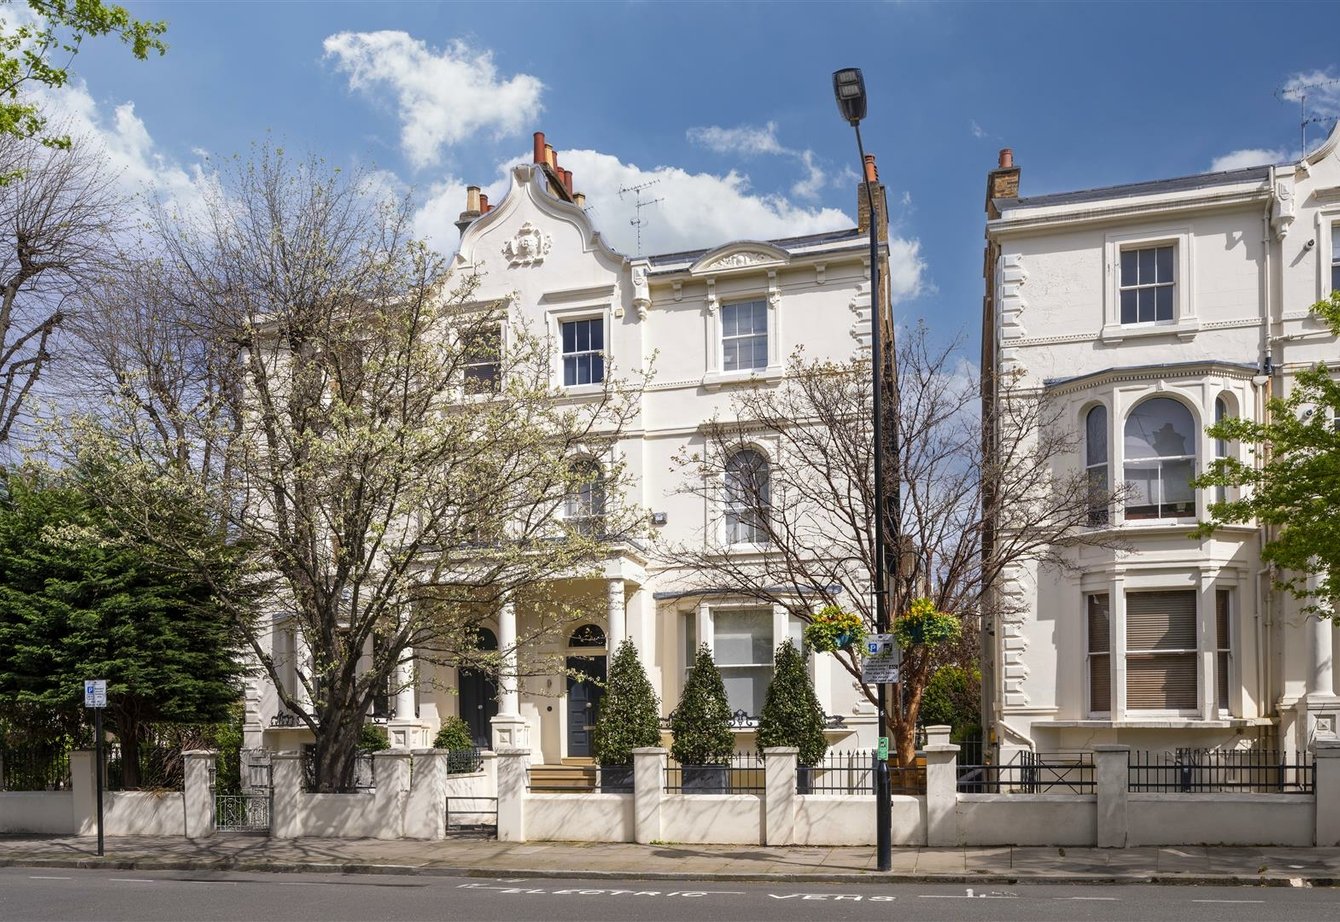 for-sale-randolph-road-london-406-view1